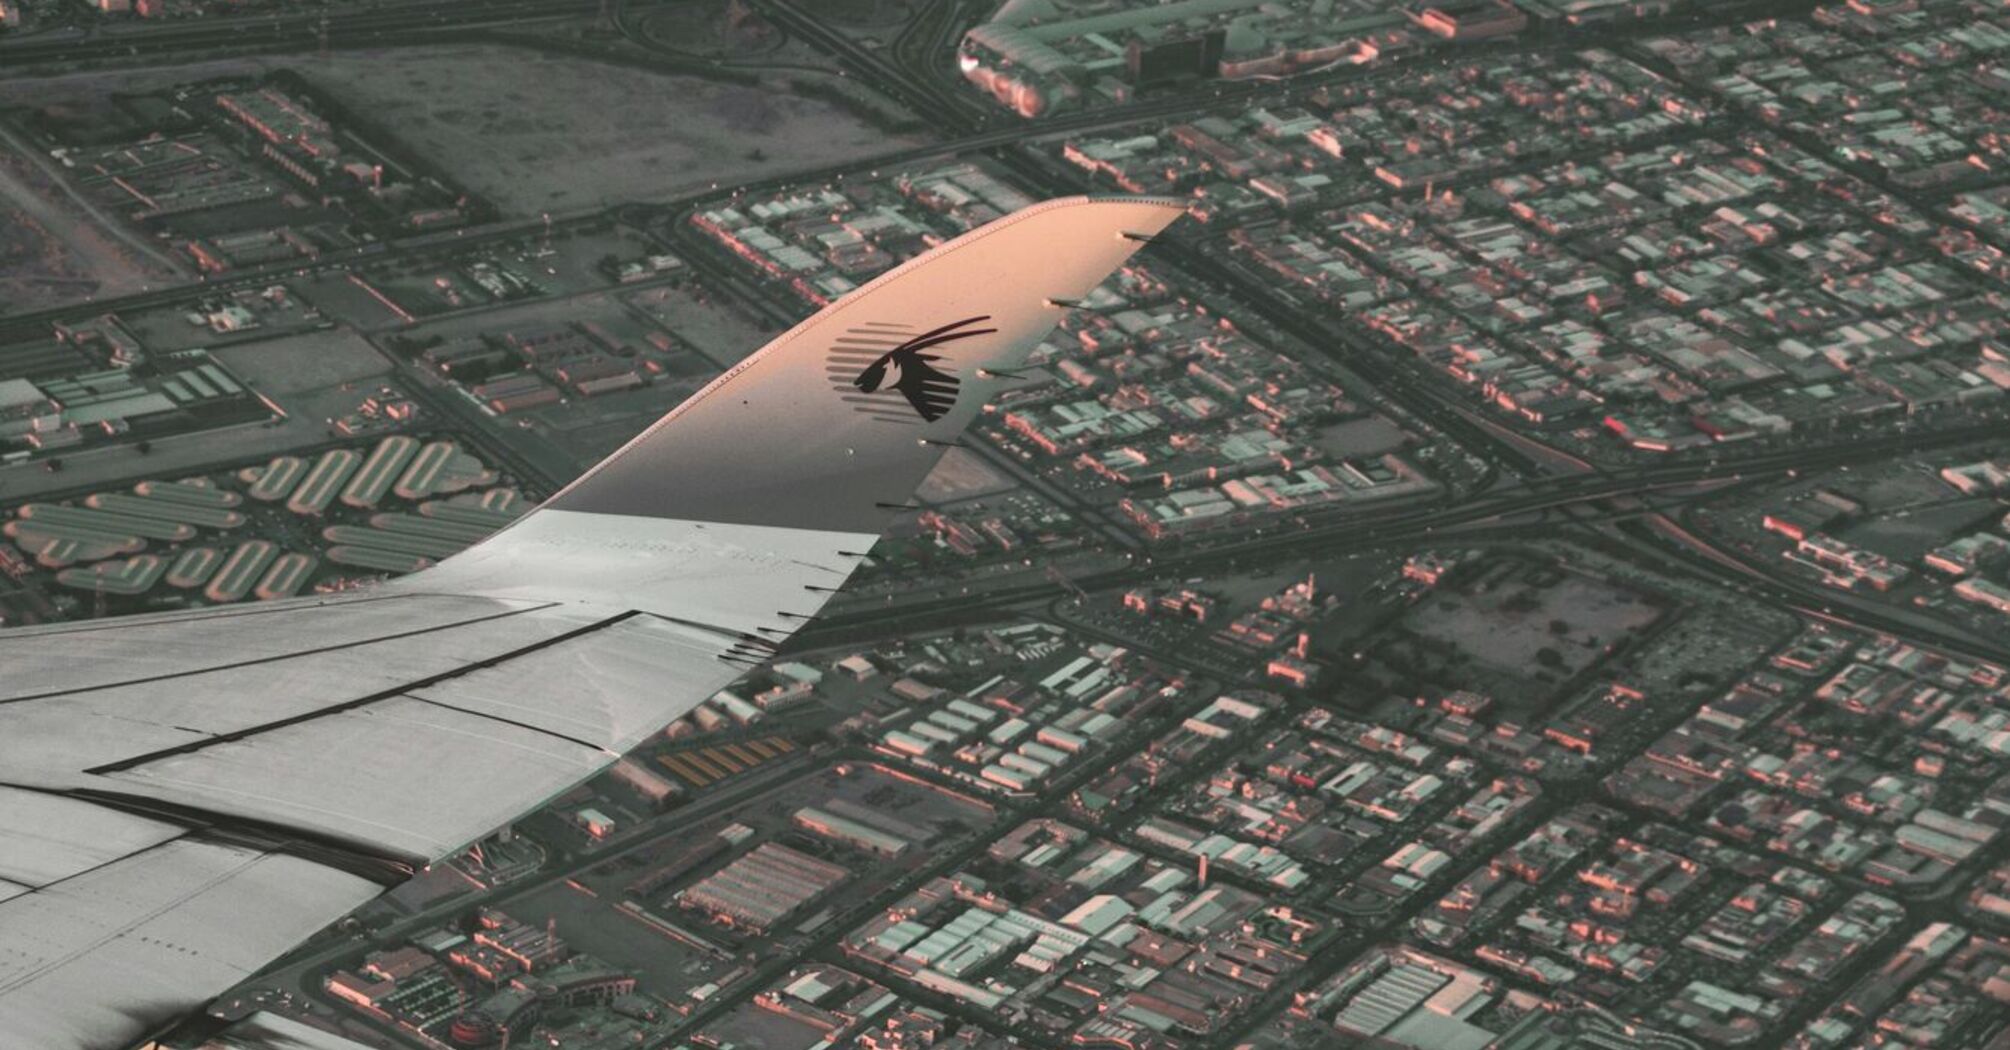 Aerial view from a Qatar Airways plane over a cityscape